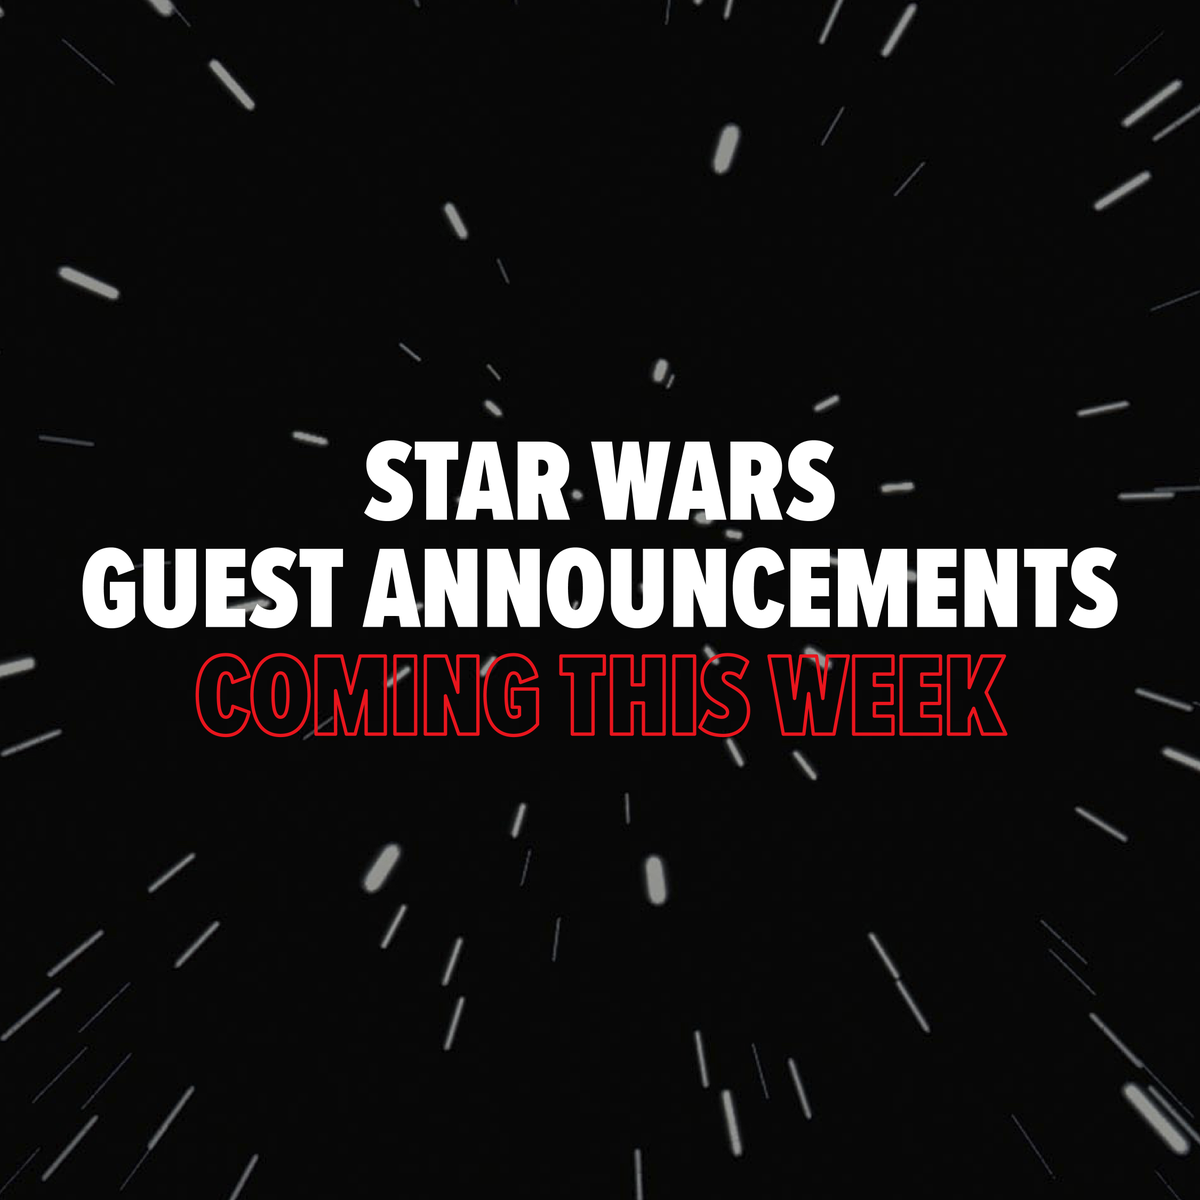 Star Wars guests for FAN EXPO Canada are dropping this week. Grab your show tickets, ignite your lightsabers, and keep your eyes here to be the first to know. spr.ly/6010j813K